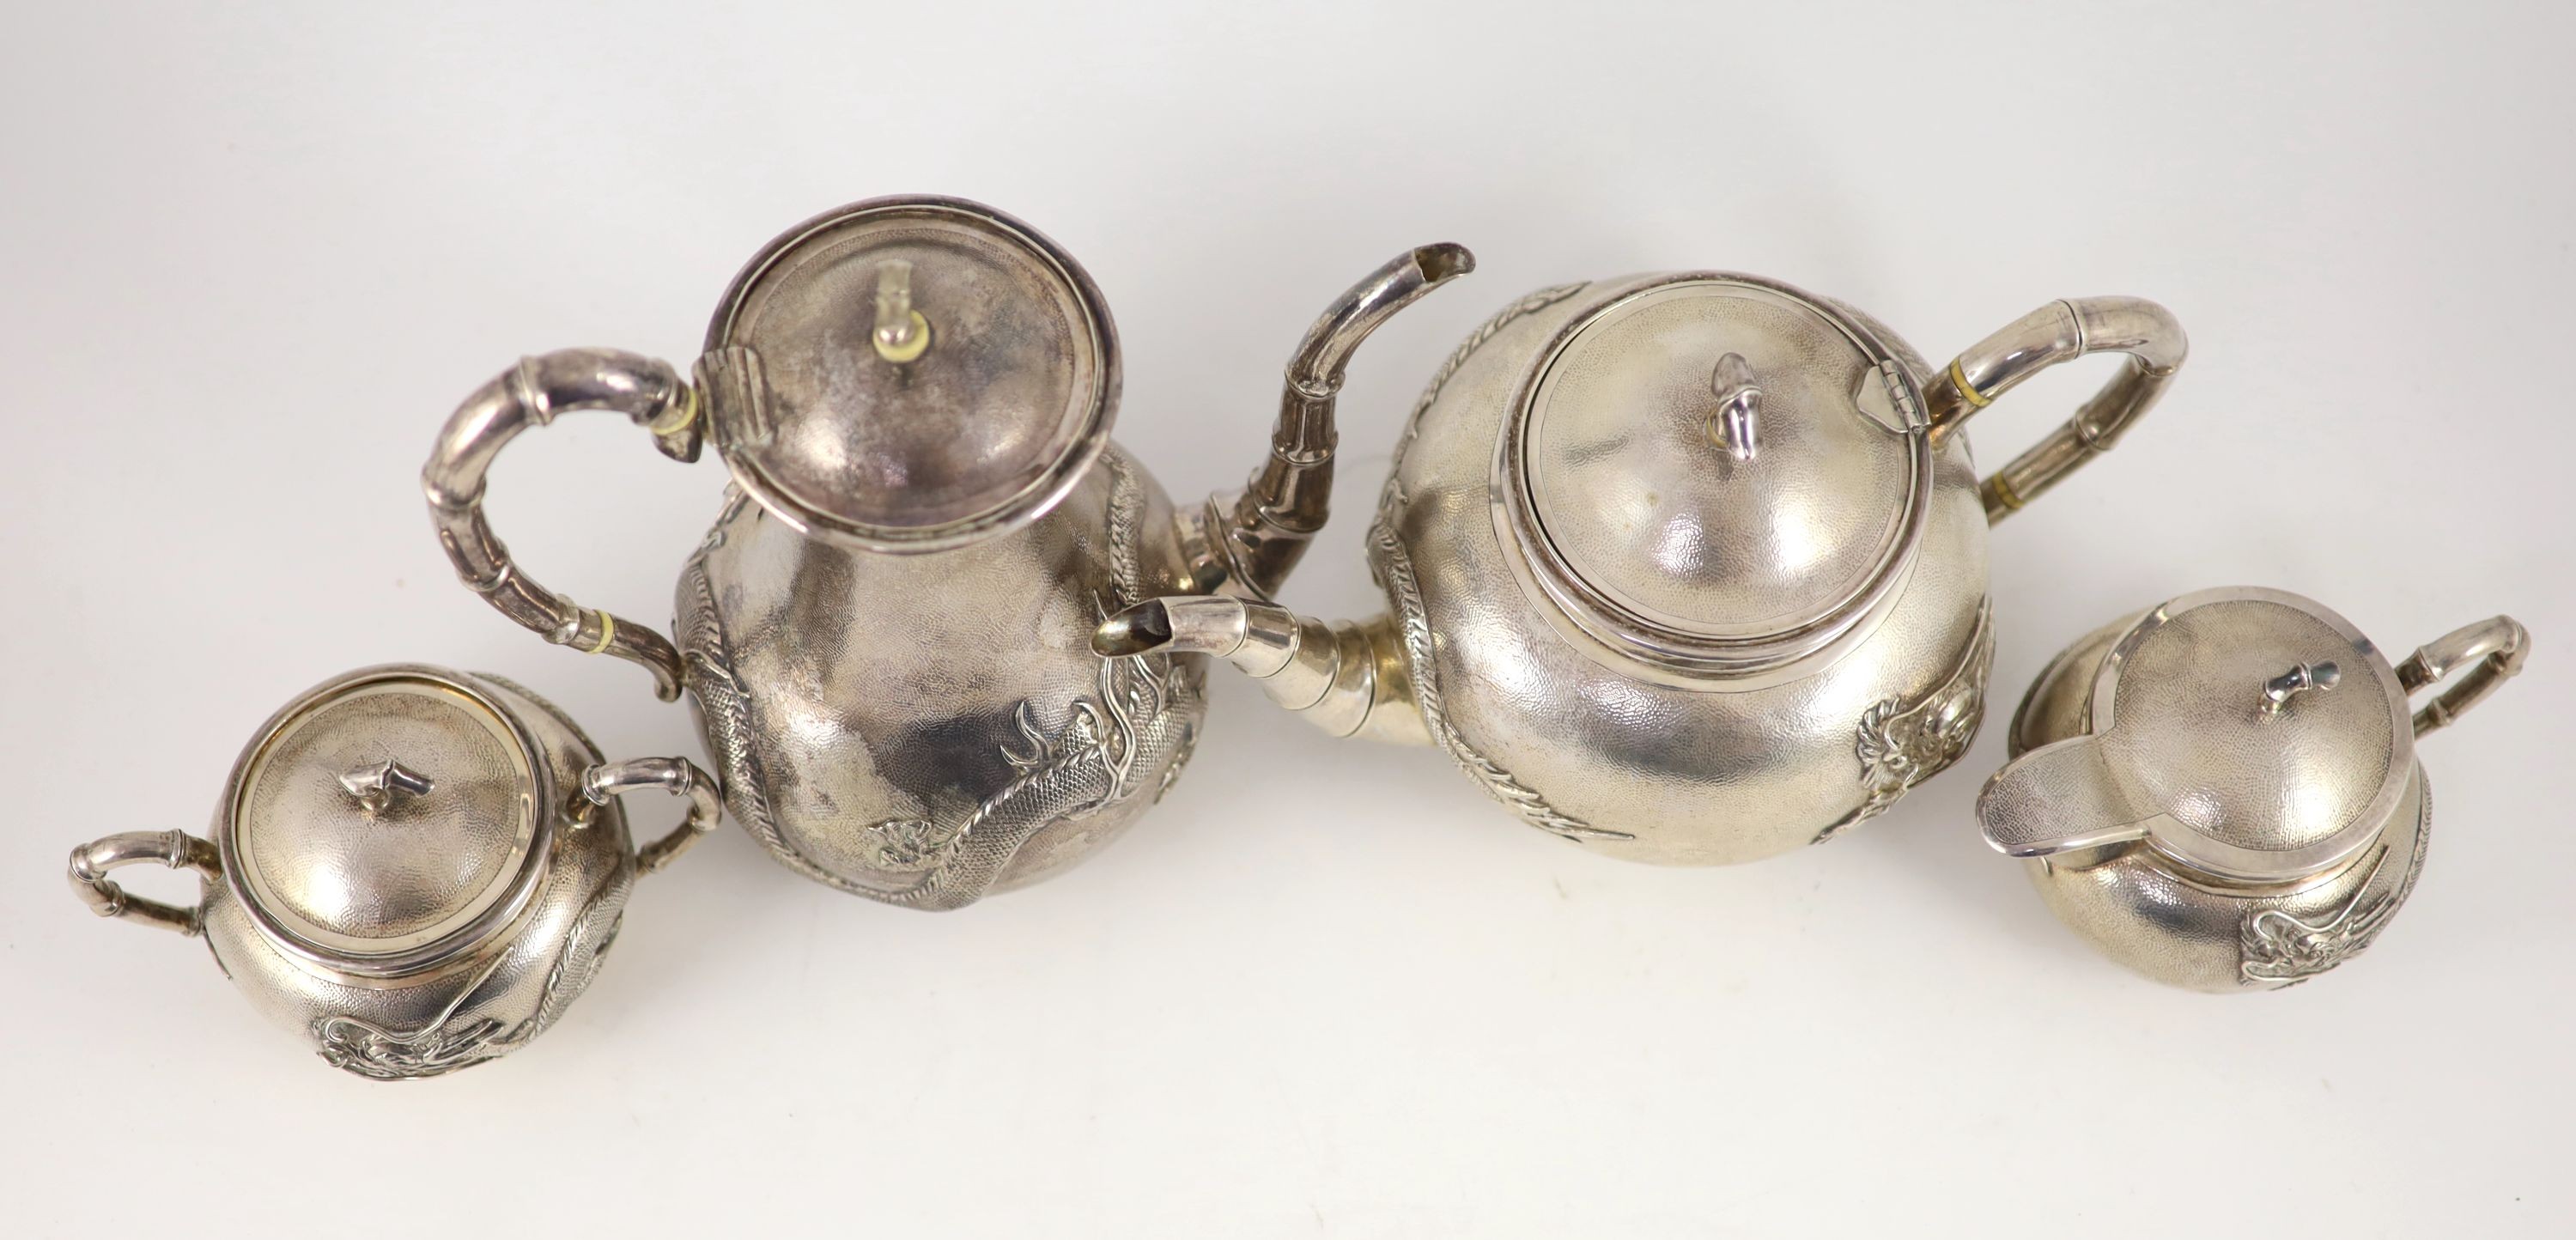 A matched early 20th century Chinese four piece planished silver tea and coffee set, cream and sugar by Wang Hing, teapot by Tack Hing and coffee pot apparently unmarked